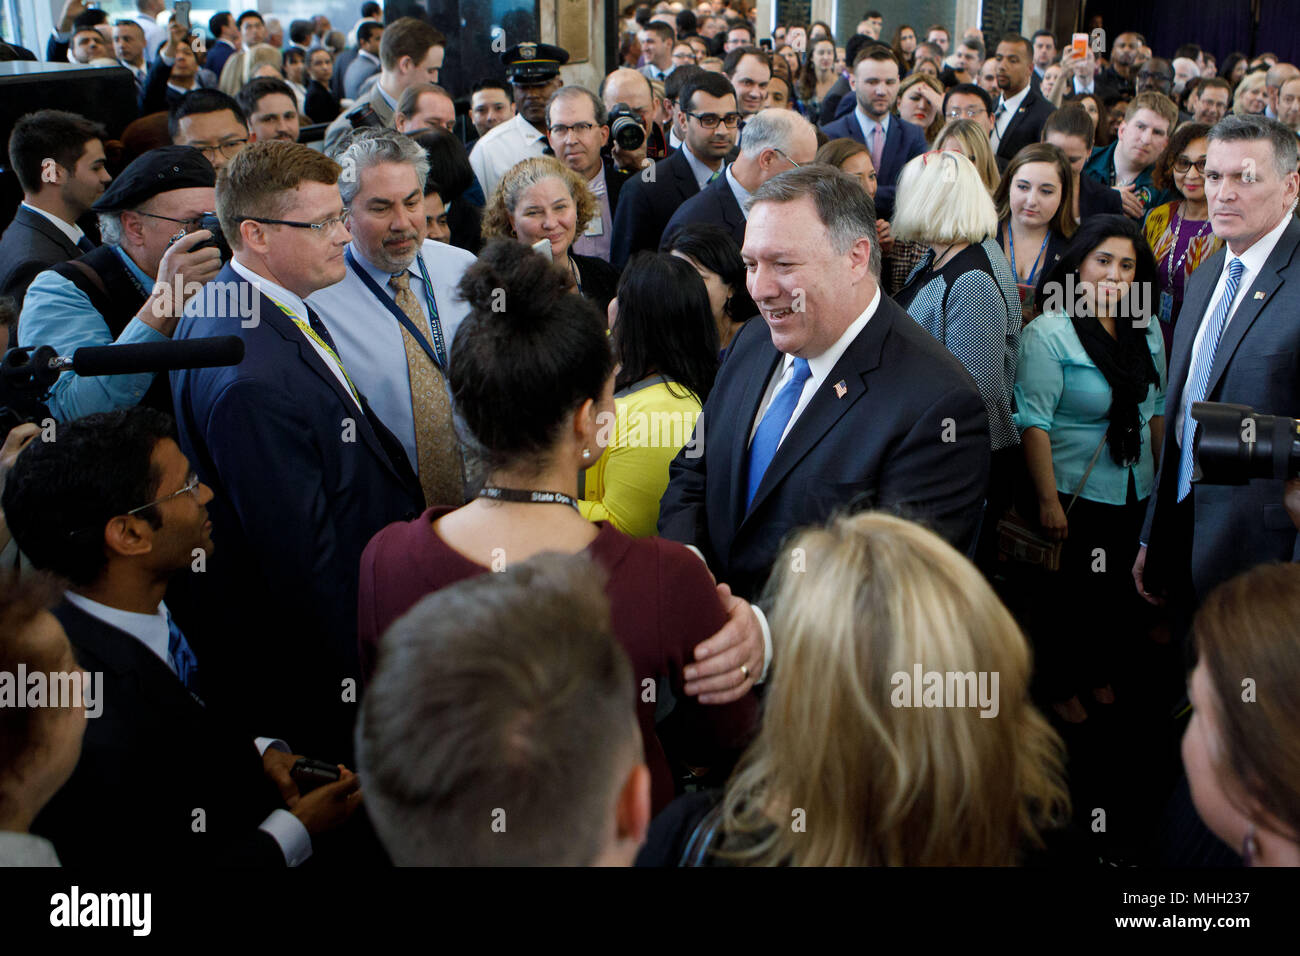 (180501) -- WASHINGTON, May 1, 2018 (Xinhua) -- U.S. Secretary of State Mike Pompeo greets State Department employees at the Department of State in Washington D.C., the United States, on May 1, 2018. (Xinhua/Ting Shen) Stock Photo